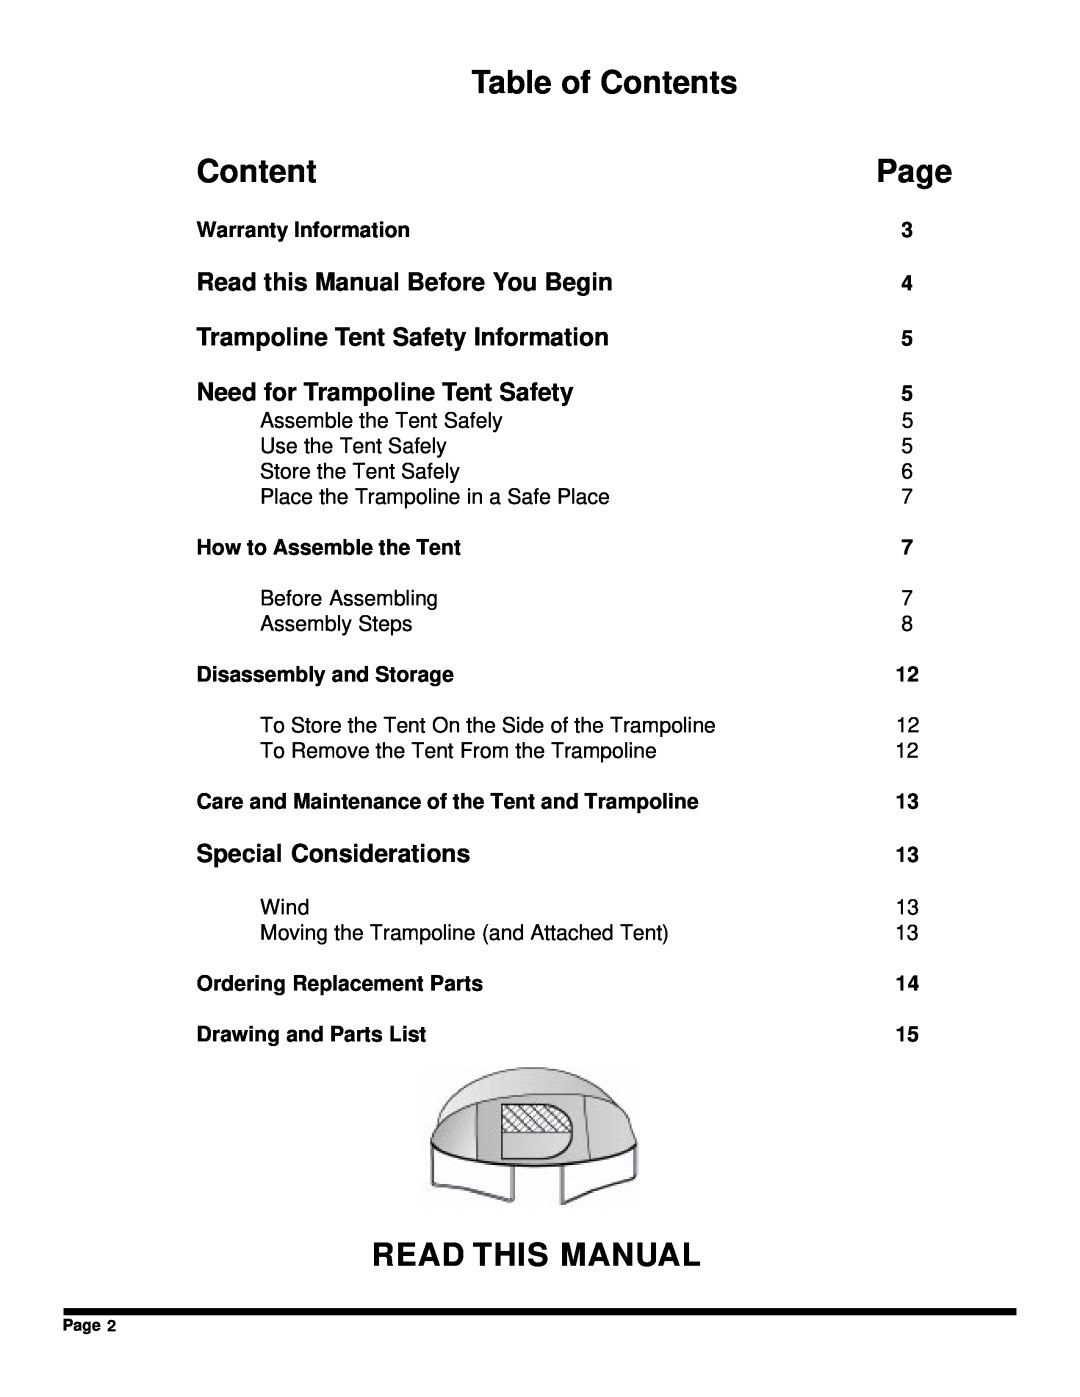 Jumpking JKTR12T2 Table of Contents, Page, Read This Manual, Read this Manual Before You Begin, Special Considerations 